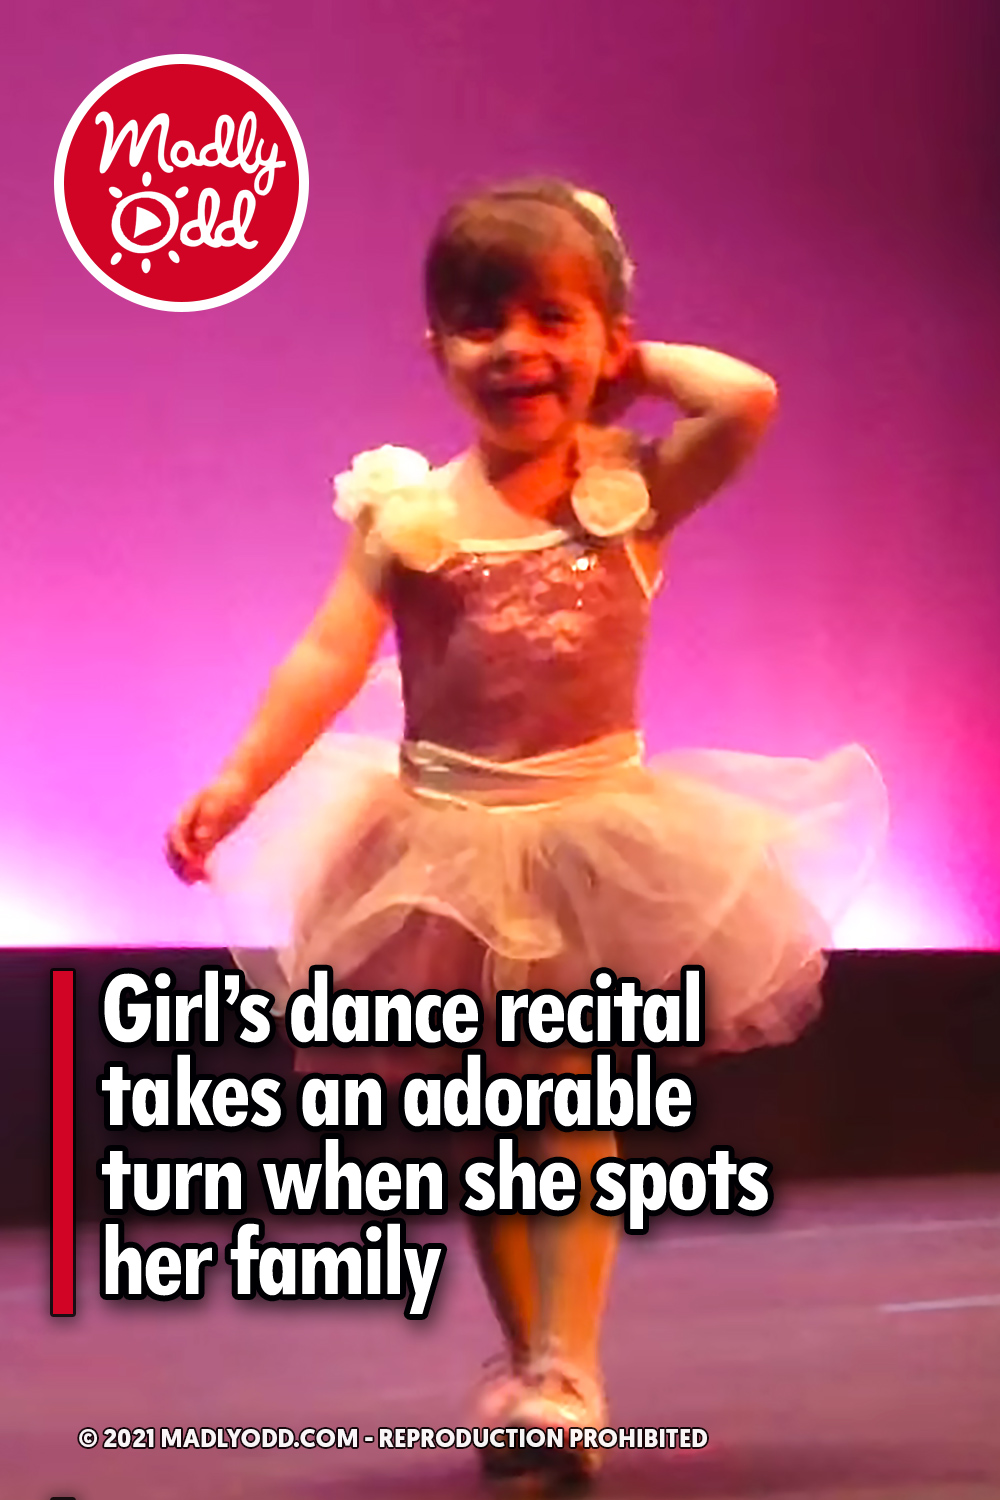 Girl’s dance recital takes an adorable turn when she spots her family ...